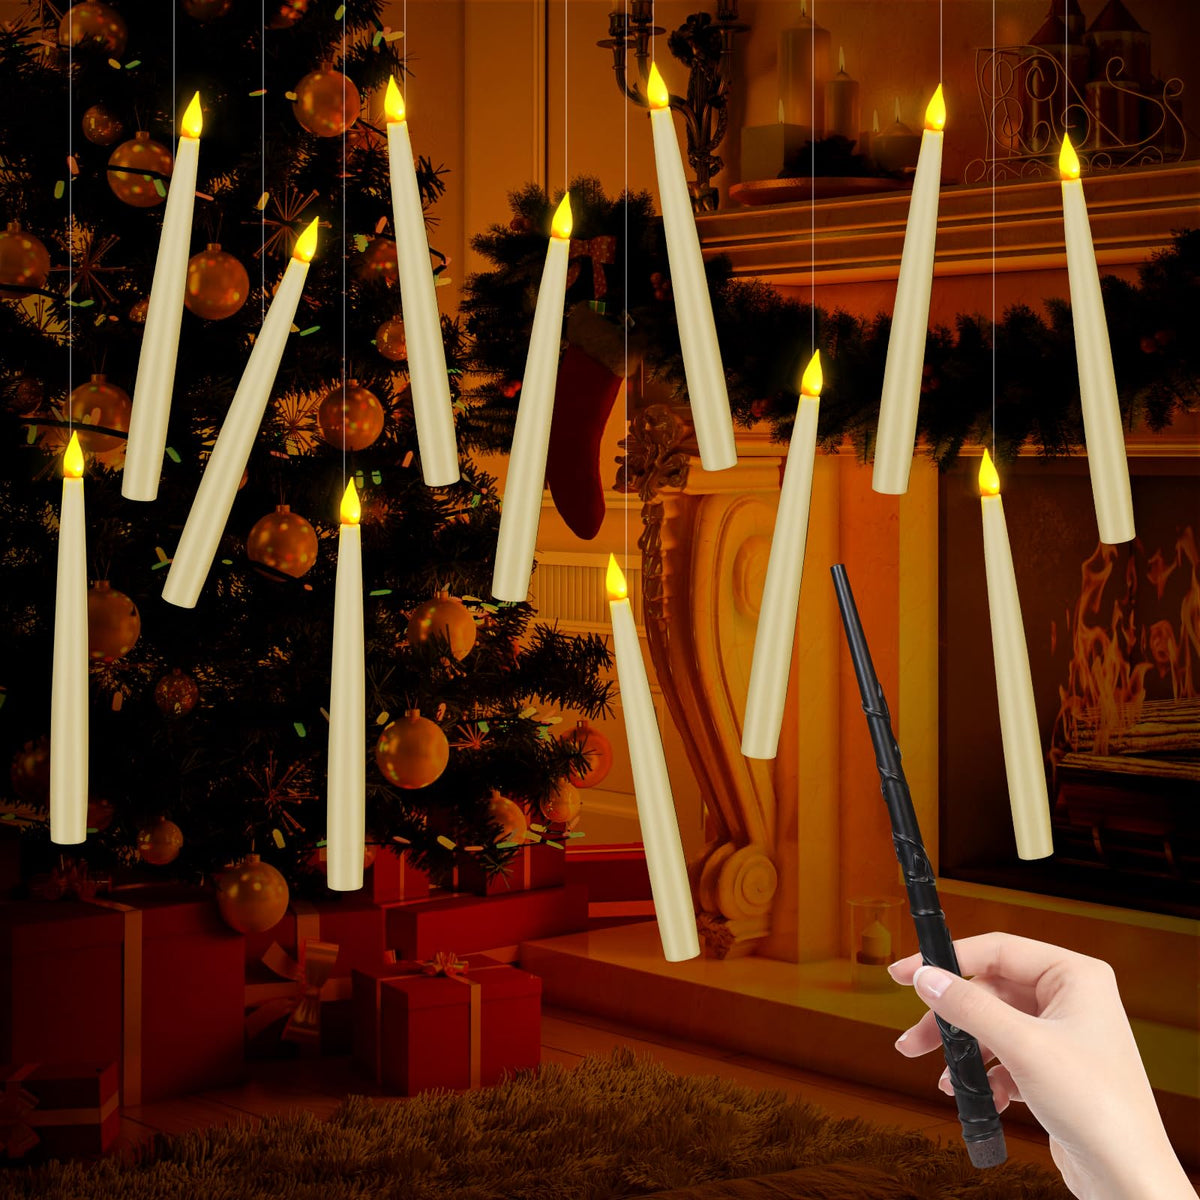 12 Harry Potter Floating Candles with Magic Wand Halloween Flameless LED  Wizard